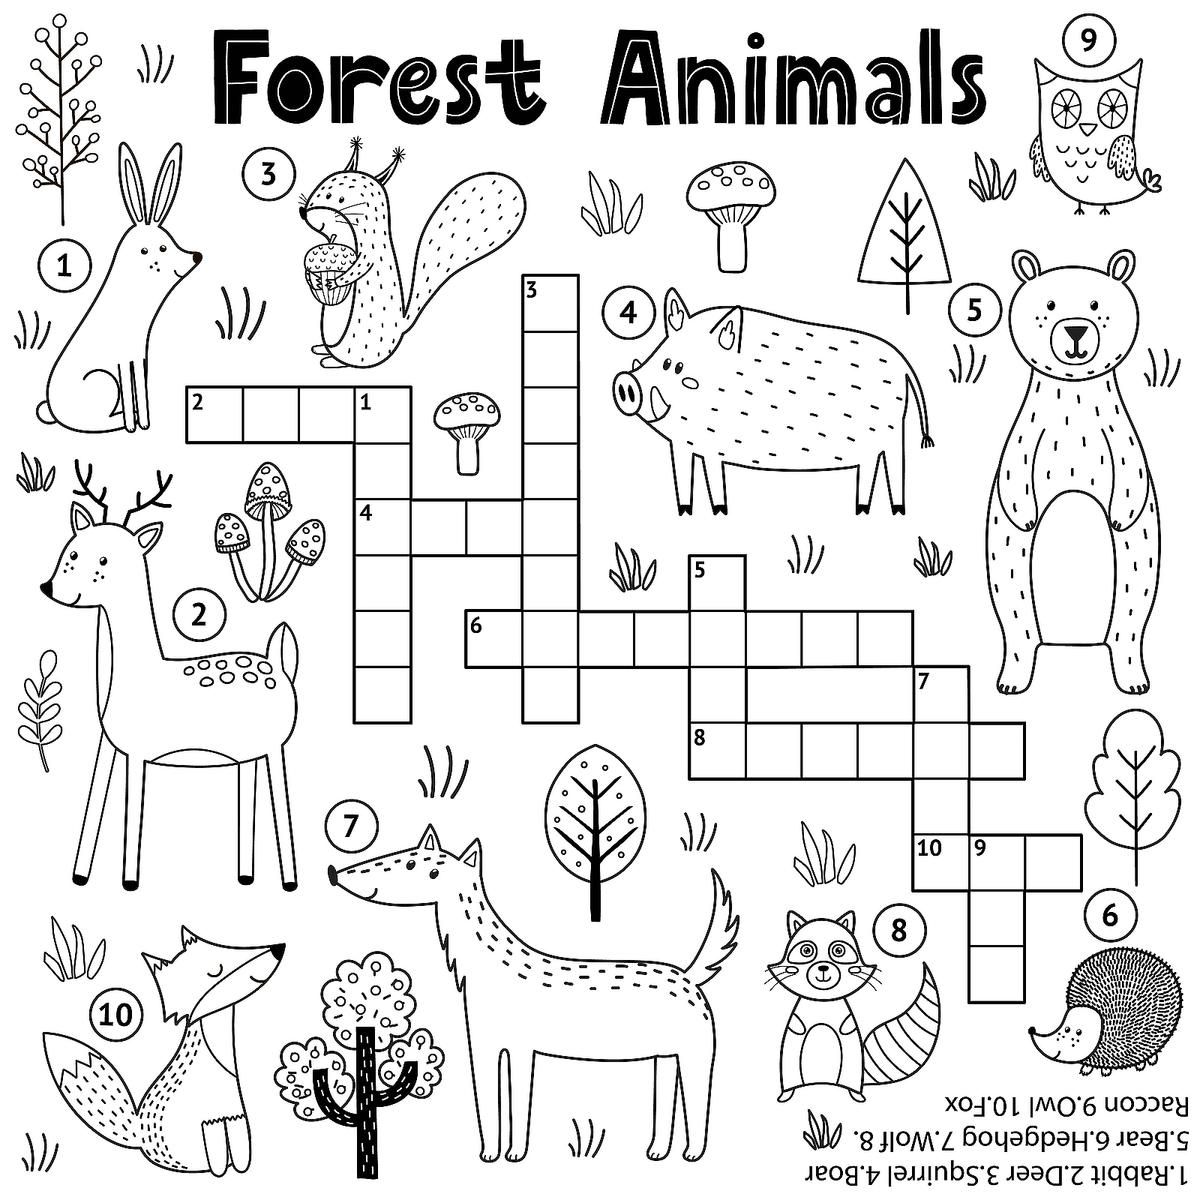 Crossword puzzl for kids fun free printable crossword puzzle coloring page activiti for children printabl seconds mom printable puzzl for kids printabl free kids printable crossword puzzl